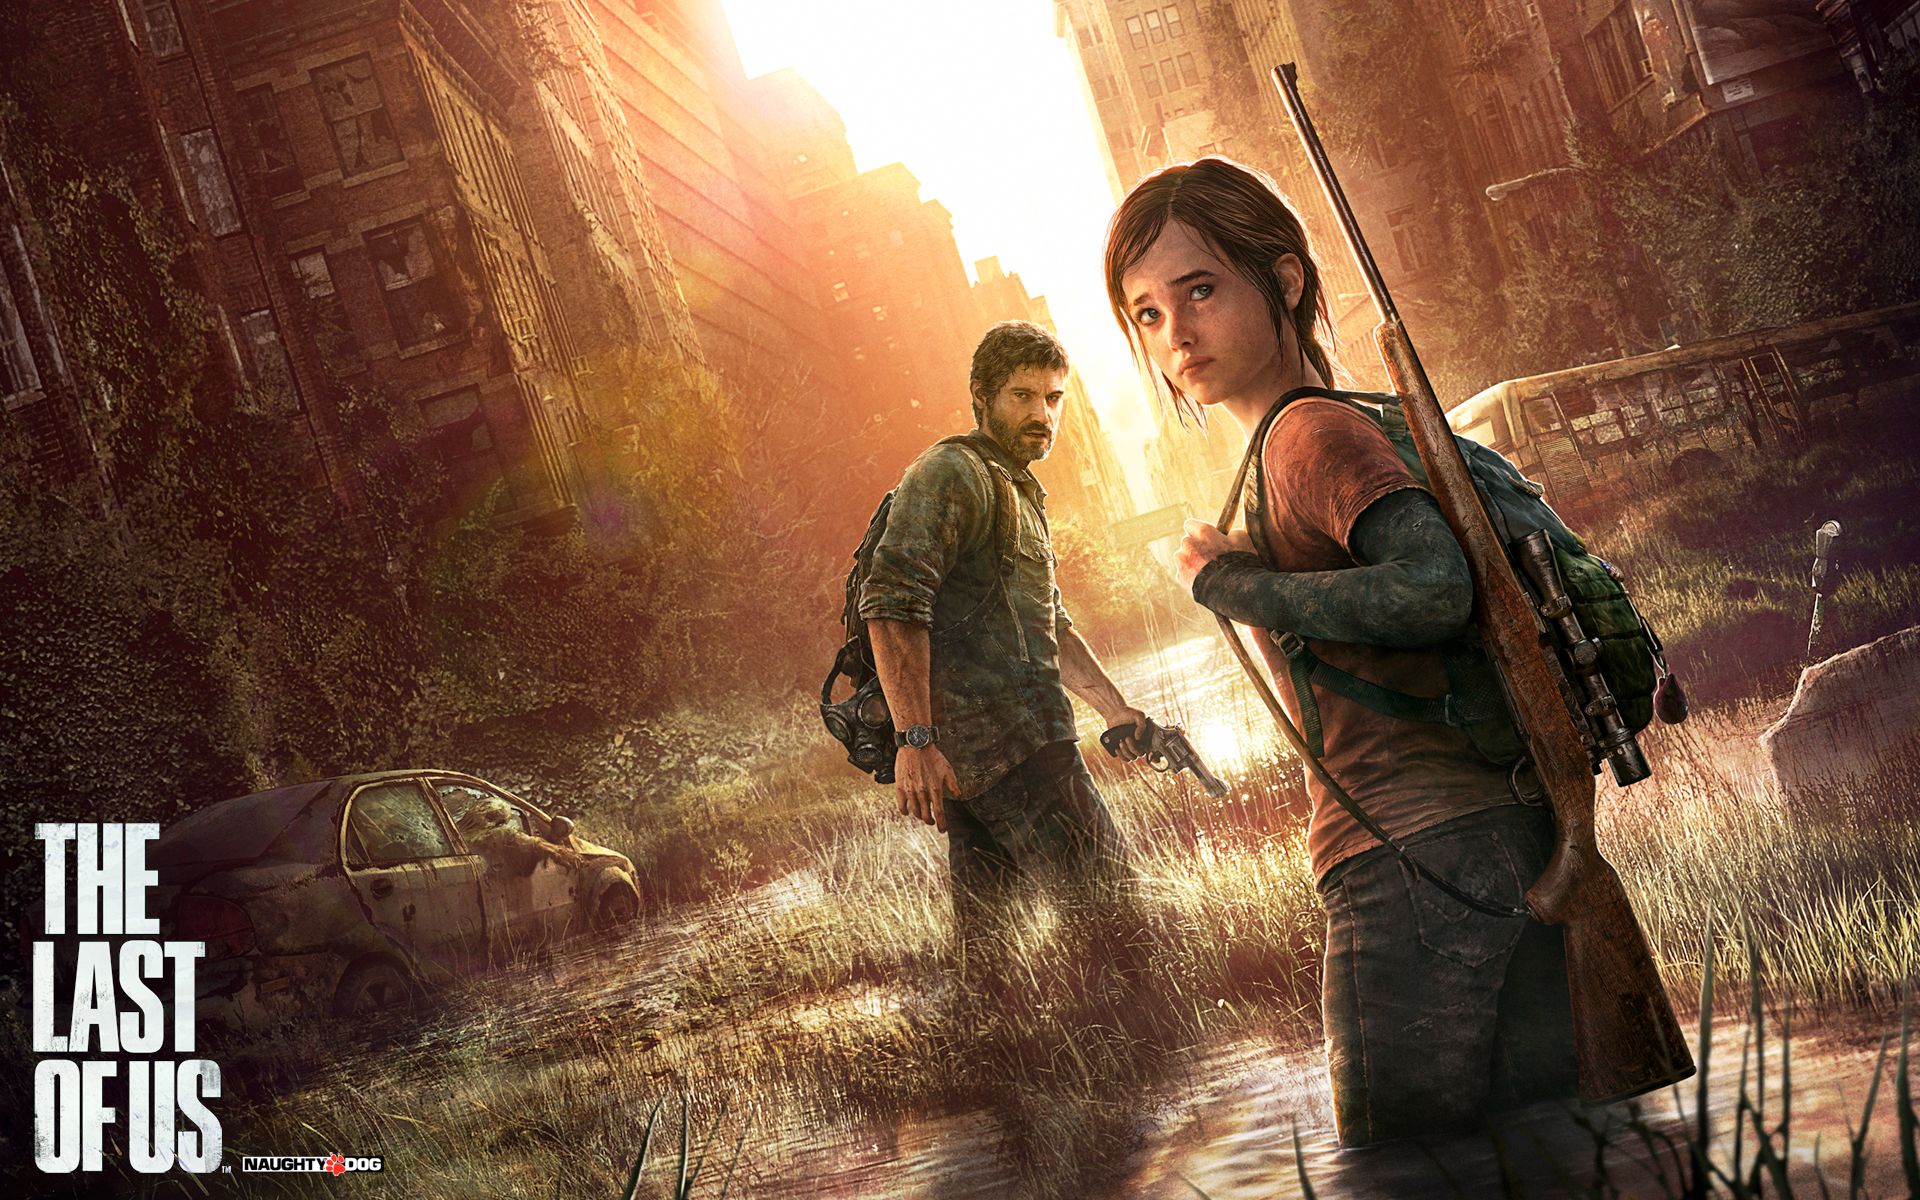 HBO's The Last of Us receives universal critical acclaim